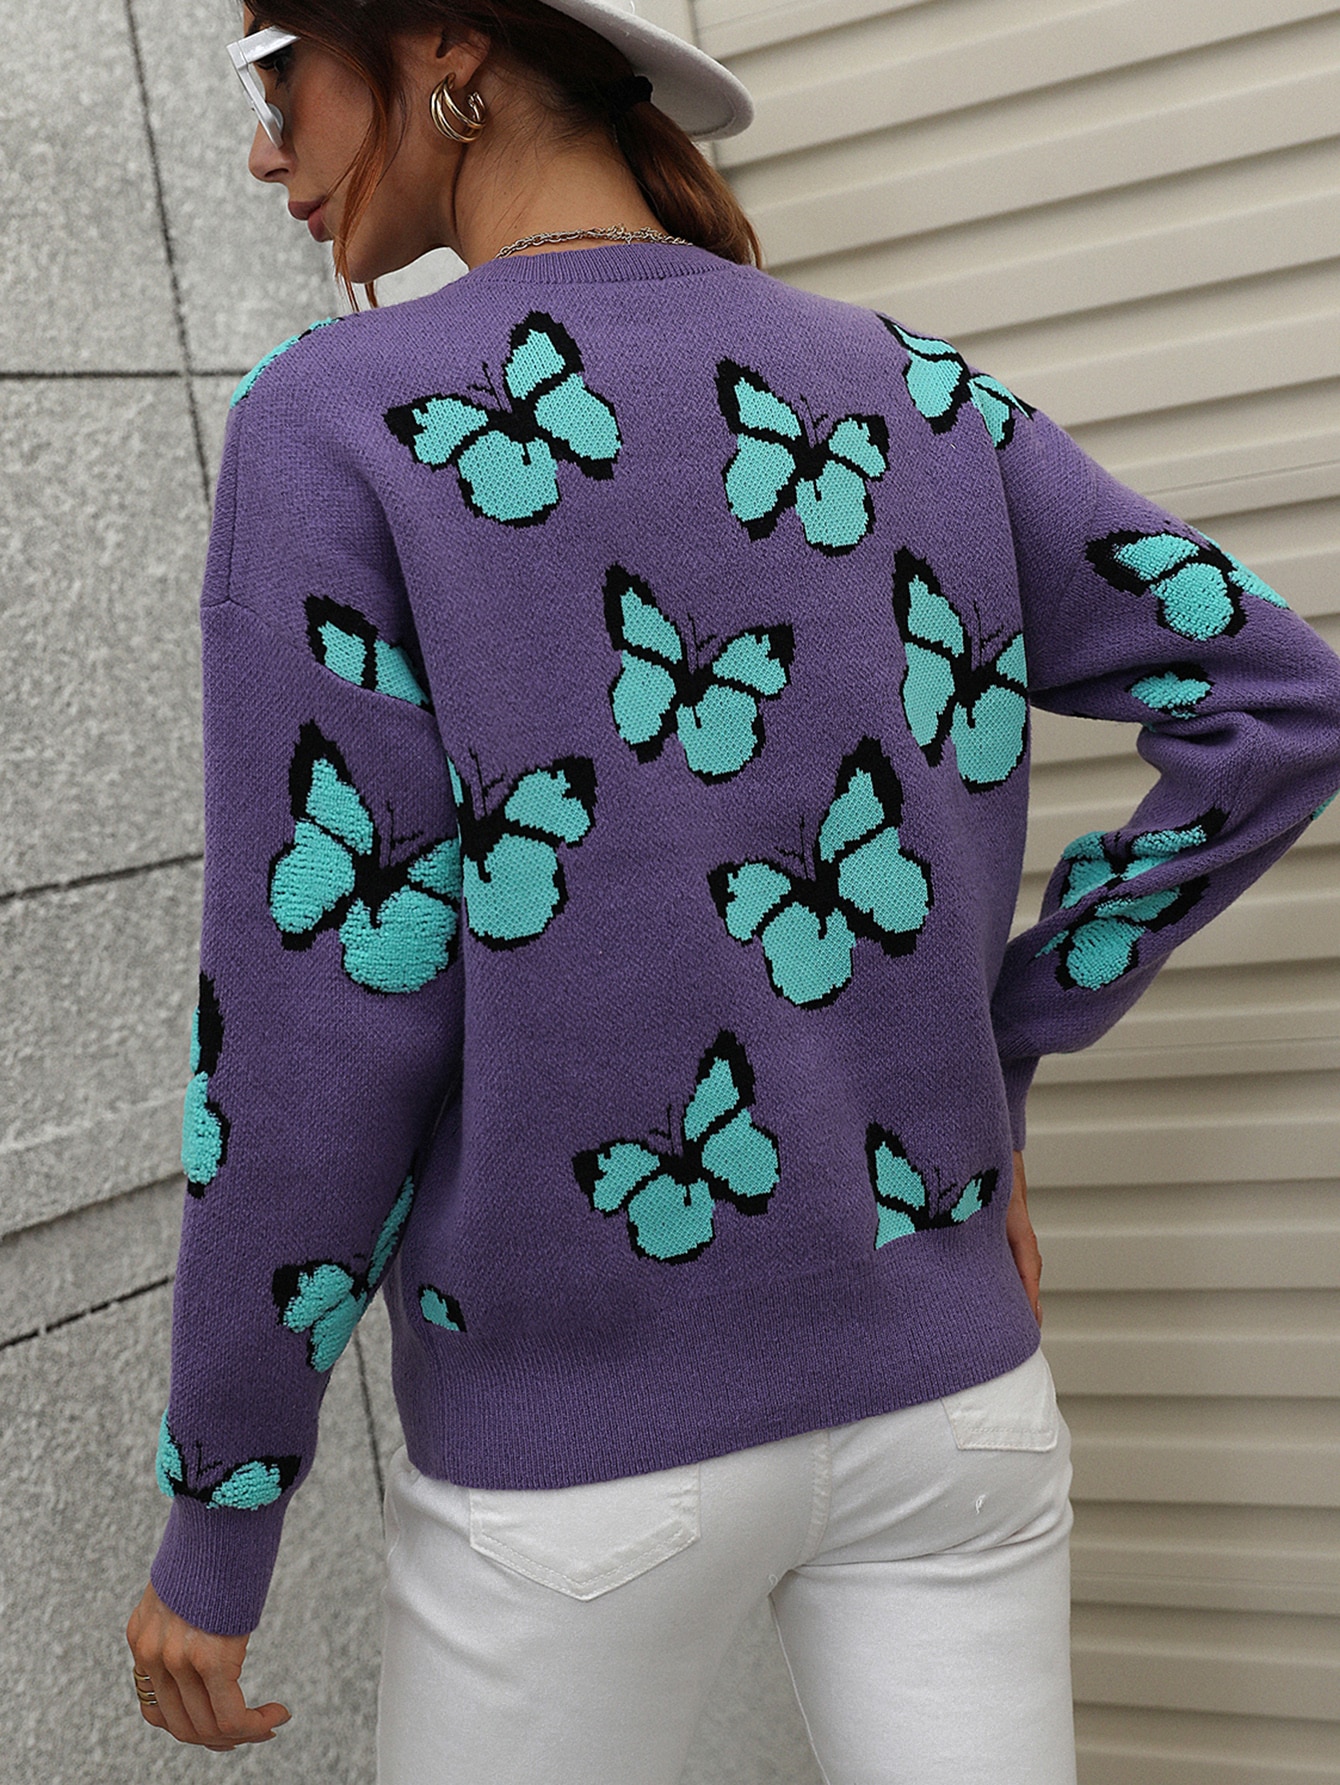 Y2K-Butterfly-Print-Sweater-Women-Long-Sleeve-Knitted-Sweaters-Autumn-Winter-Pullover-Chic-Ladies-Tops-Loose-5